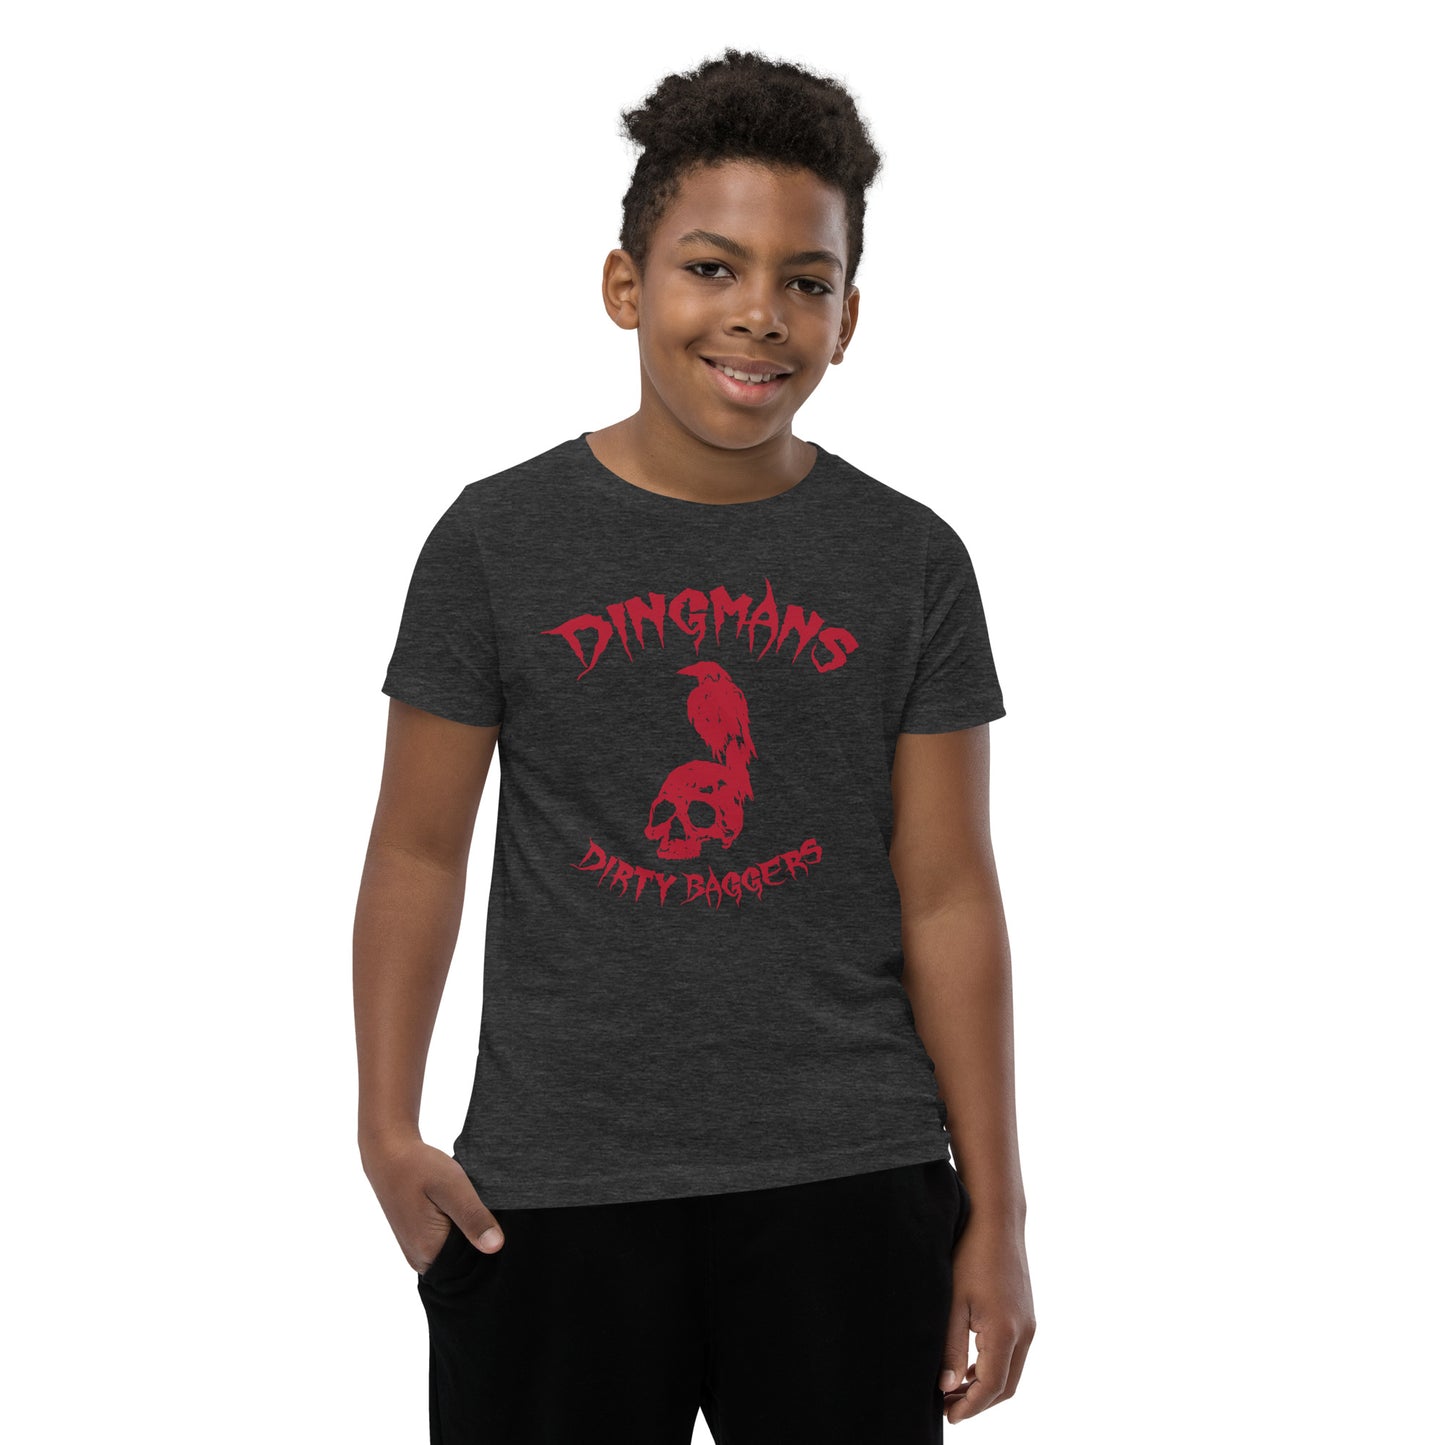 Dingmans Dirty Baggers Youth Short Sleeve T-Shirt